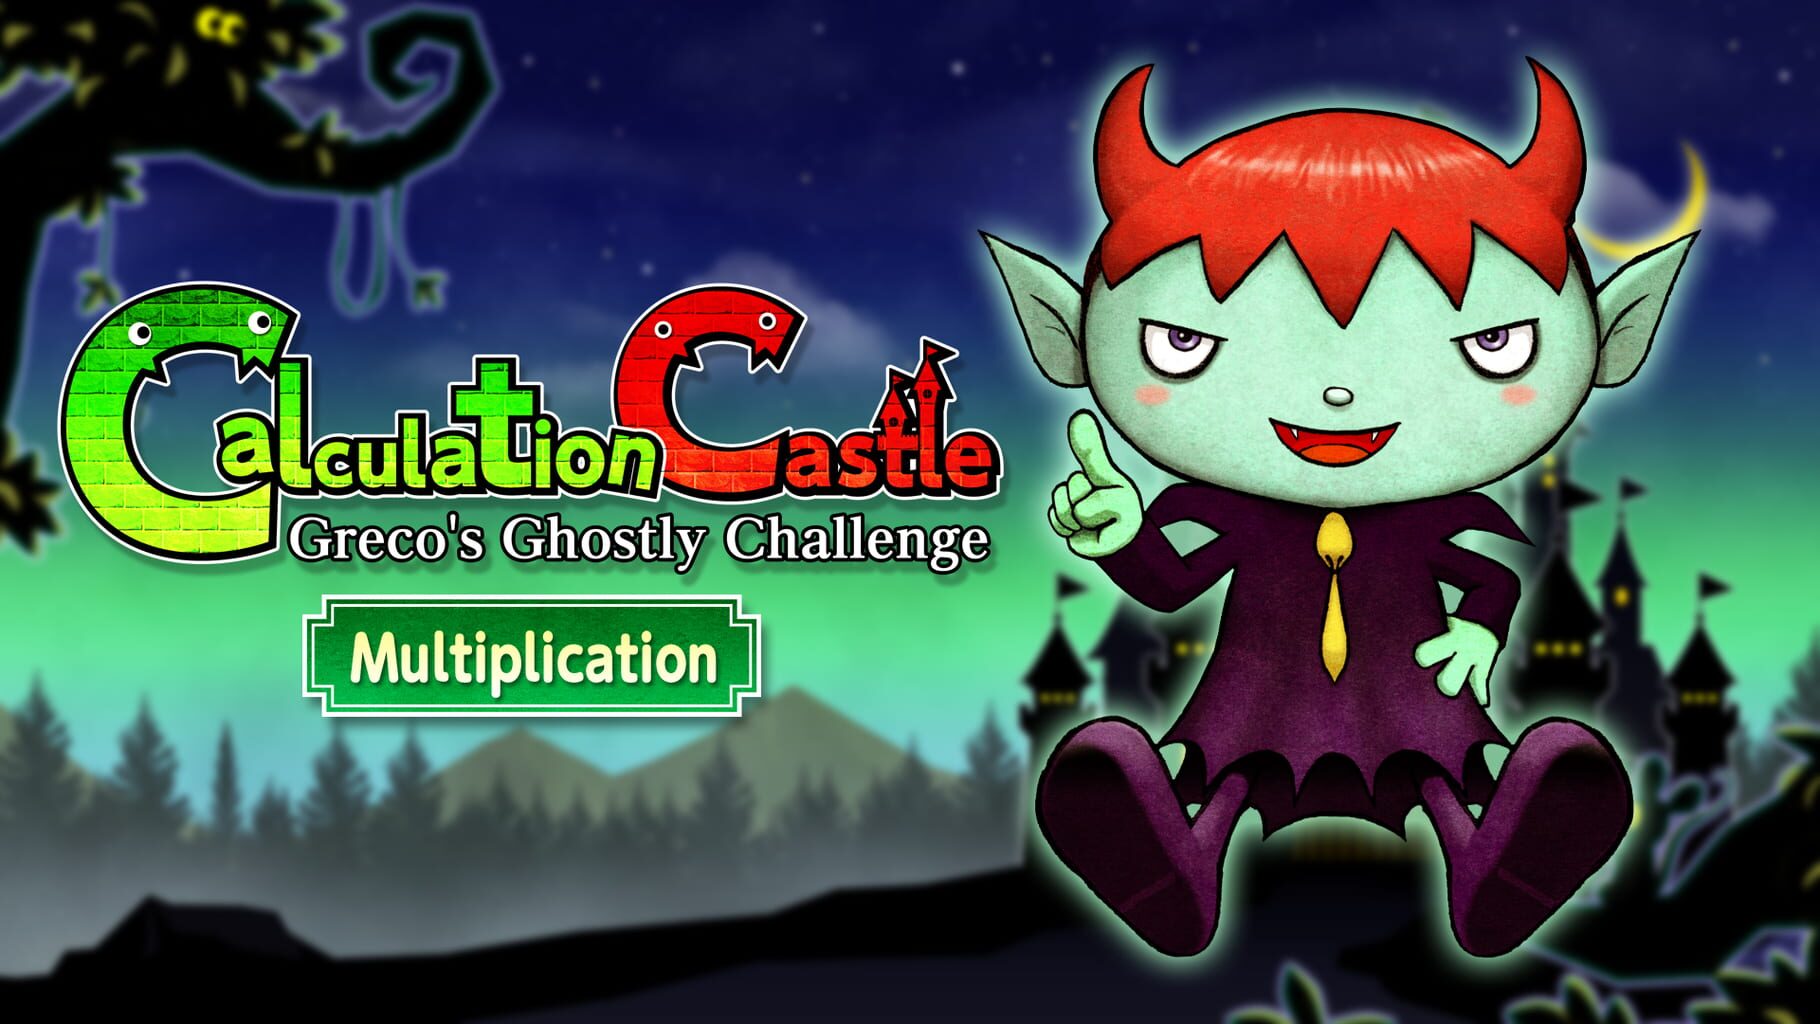 Calculation Castle: Greco's Ghostly Challenge "Multiplication" artwork